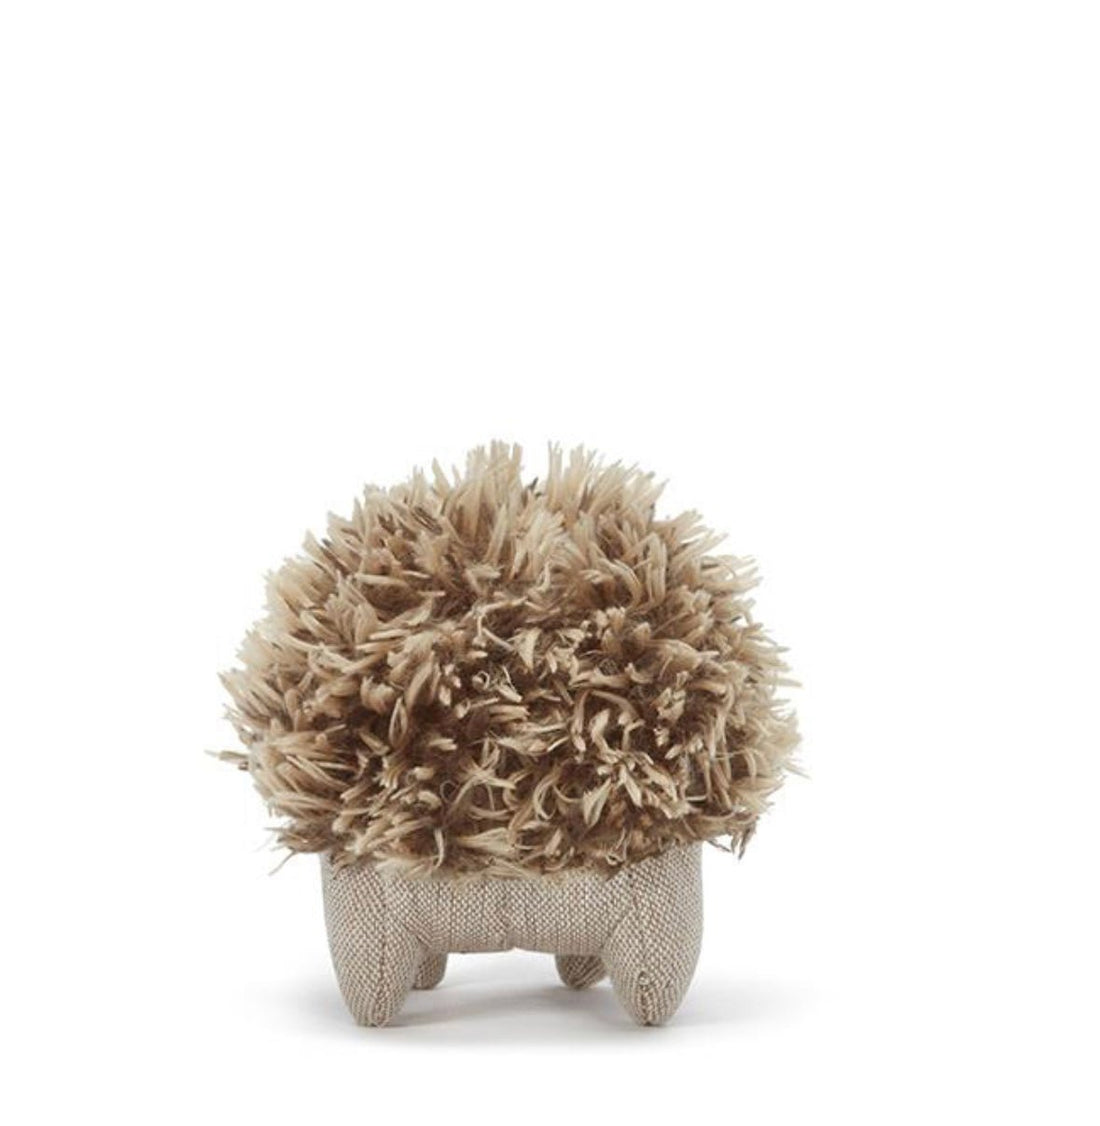 Mini Spike the Echidna Rattle - The Flower Crate